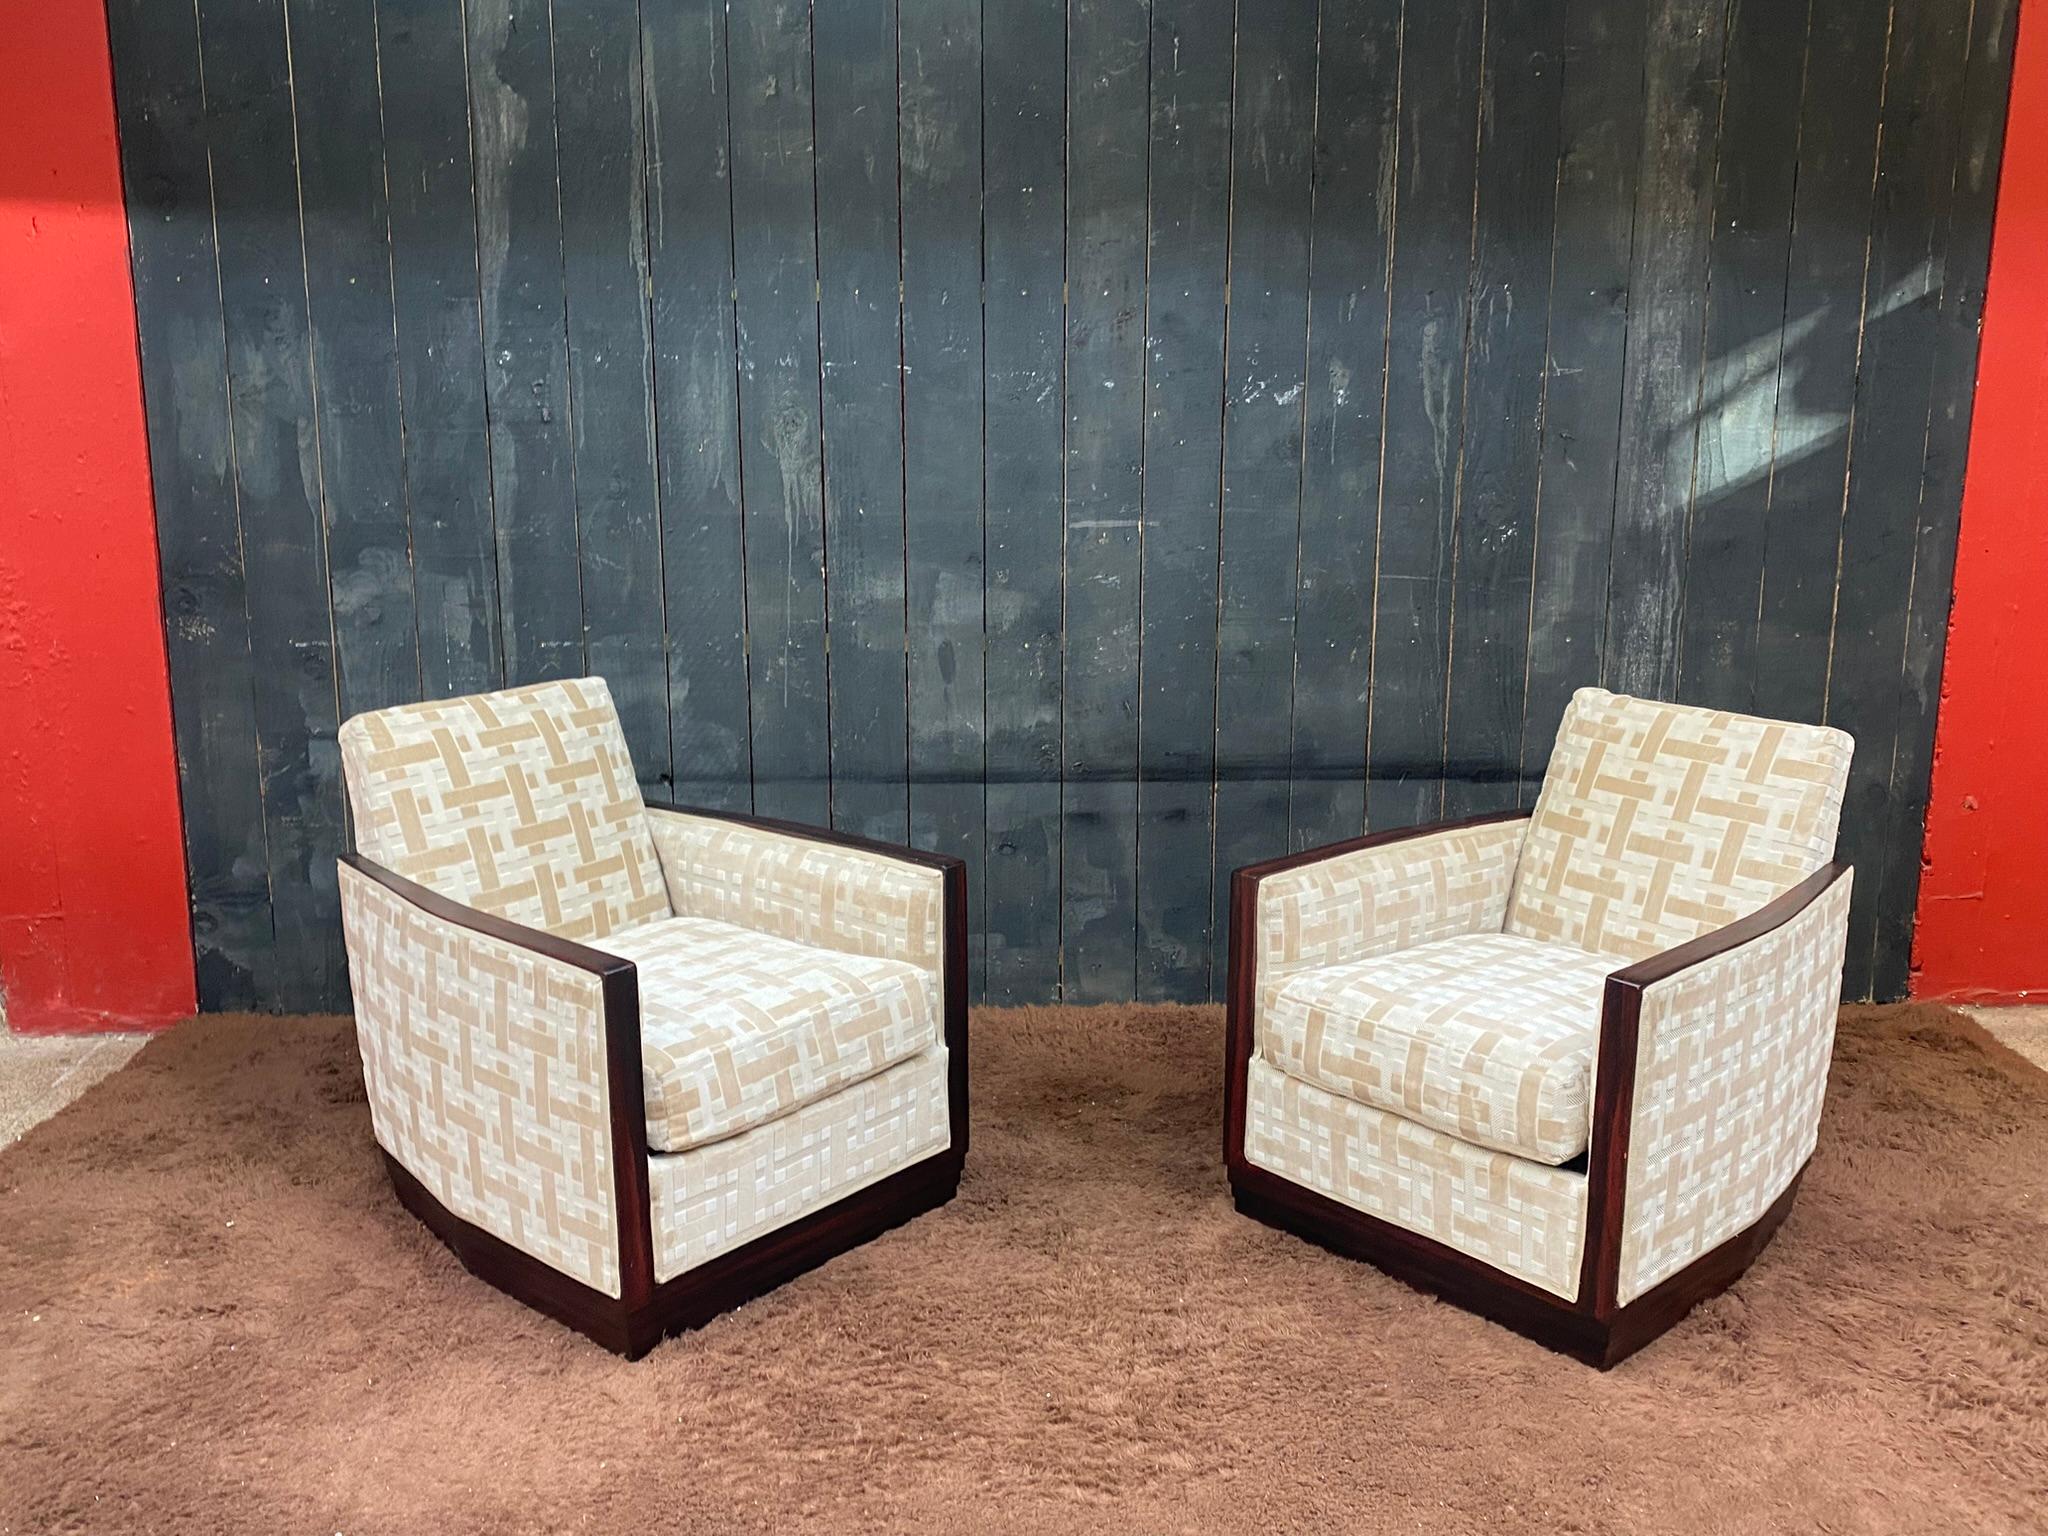 D.I.M PETIT & JOUBERT pair of elegant Art Deco armchairs, circa 1930
Fully restored armchairs, covered with Lelièvre Paris fabric, 2 pairs are available;
these armchairs have been specially restored for the filming of the film 